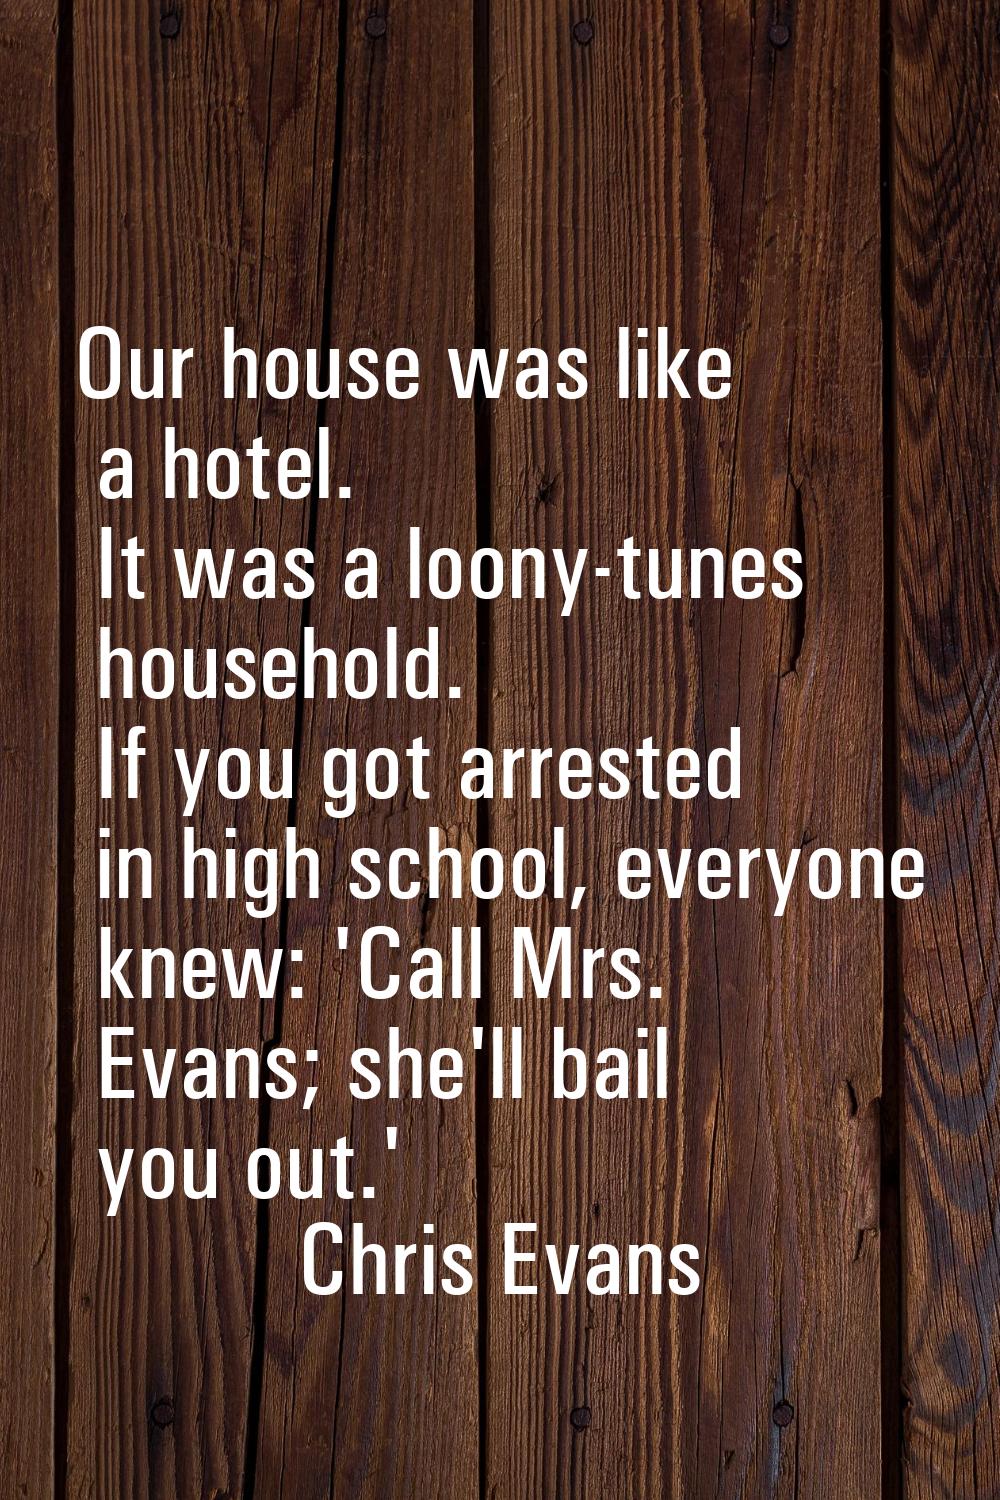 Our house was like a hotel. It was a loony-tunes household. If you got arrested in high school, eve